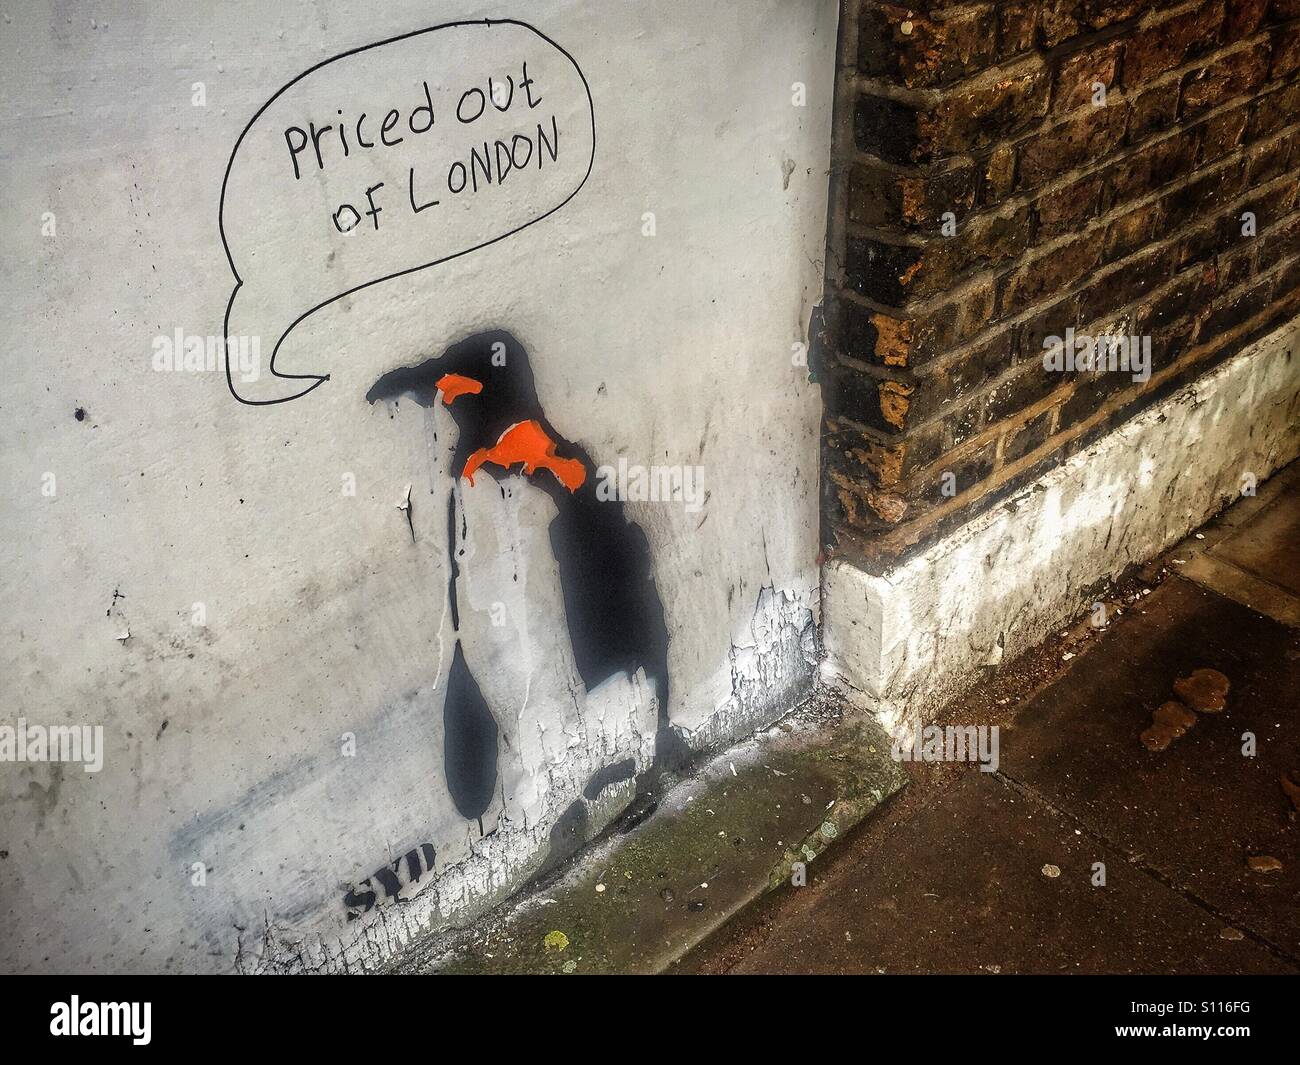 Priced out of London. Graffiti and street art in, London, U.K. Stock Photo